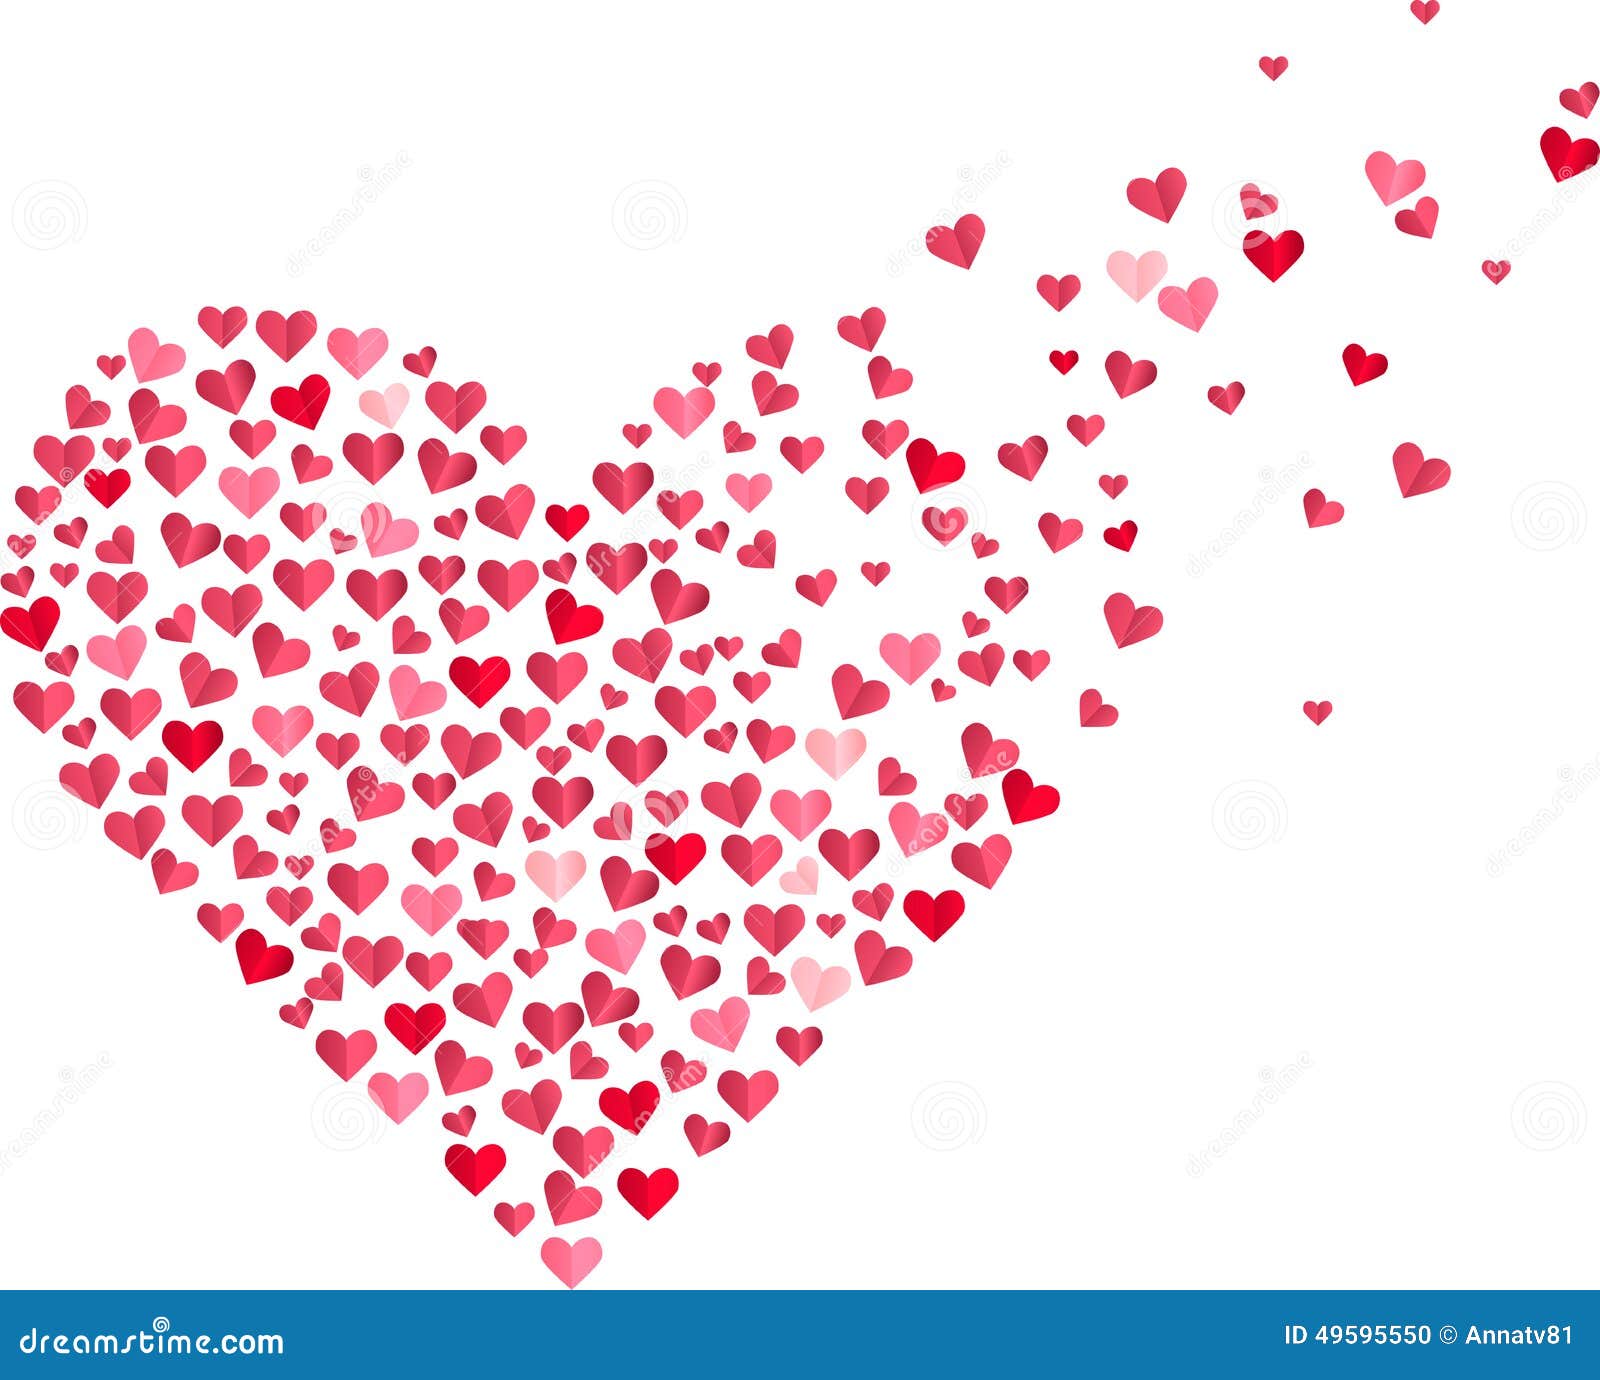 Red Heart Made Of Small Confetti Hearts Stock Vector - Image: 495955501300 x 1138